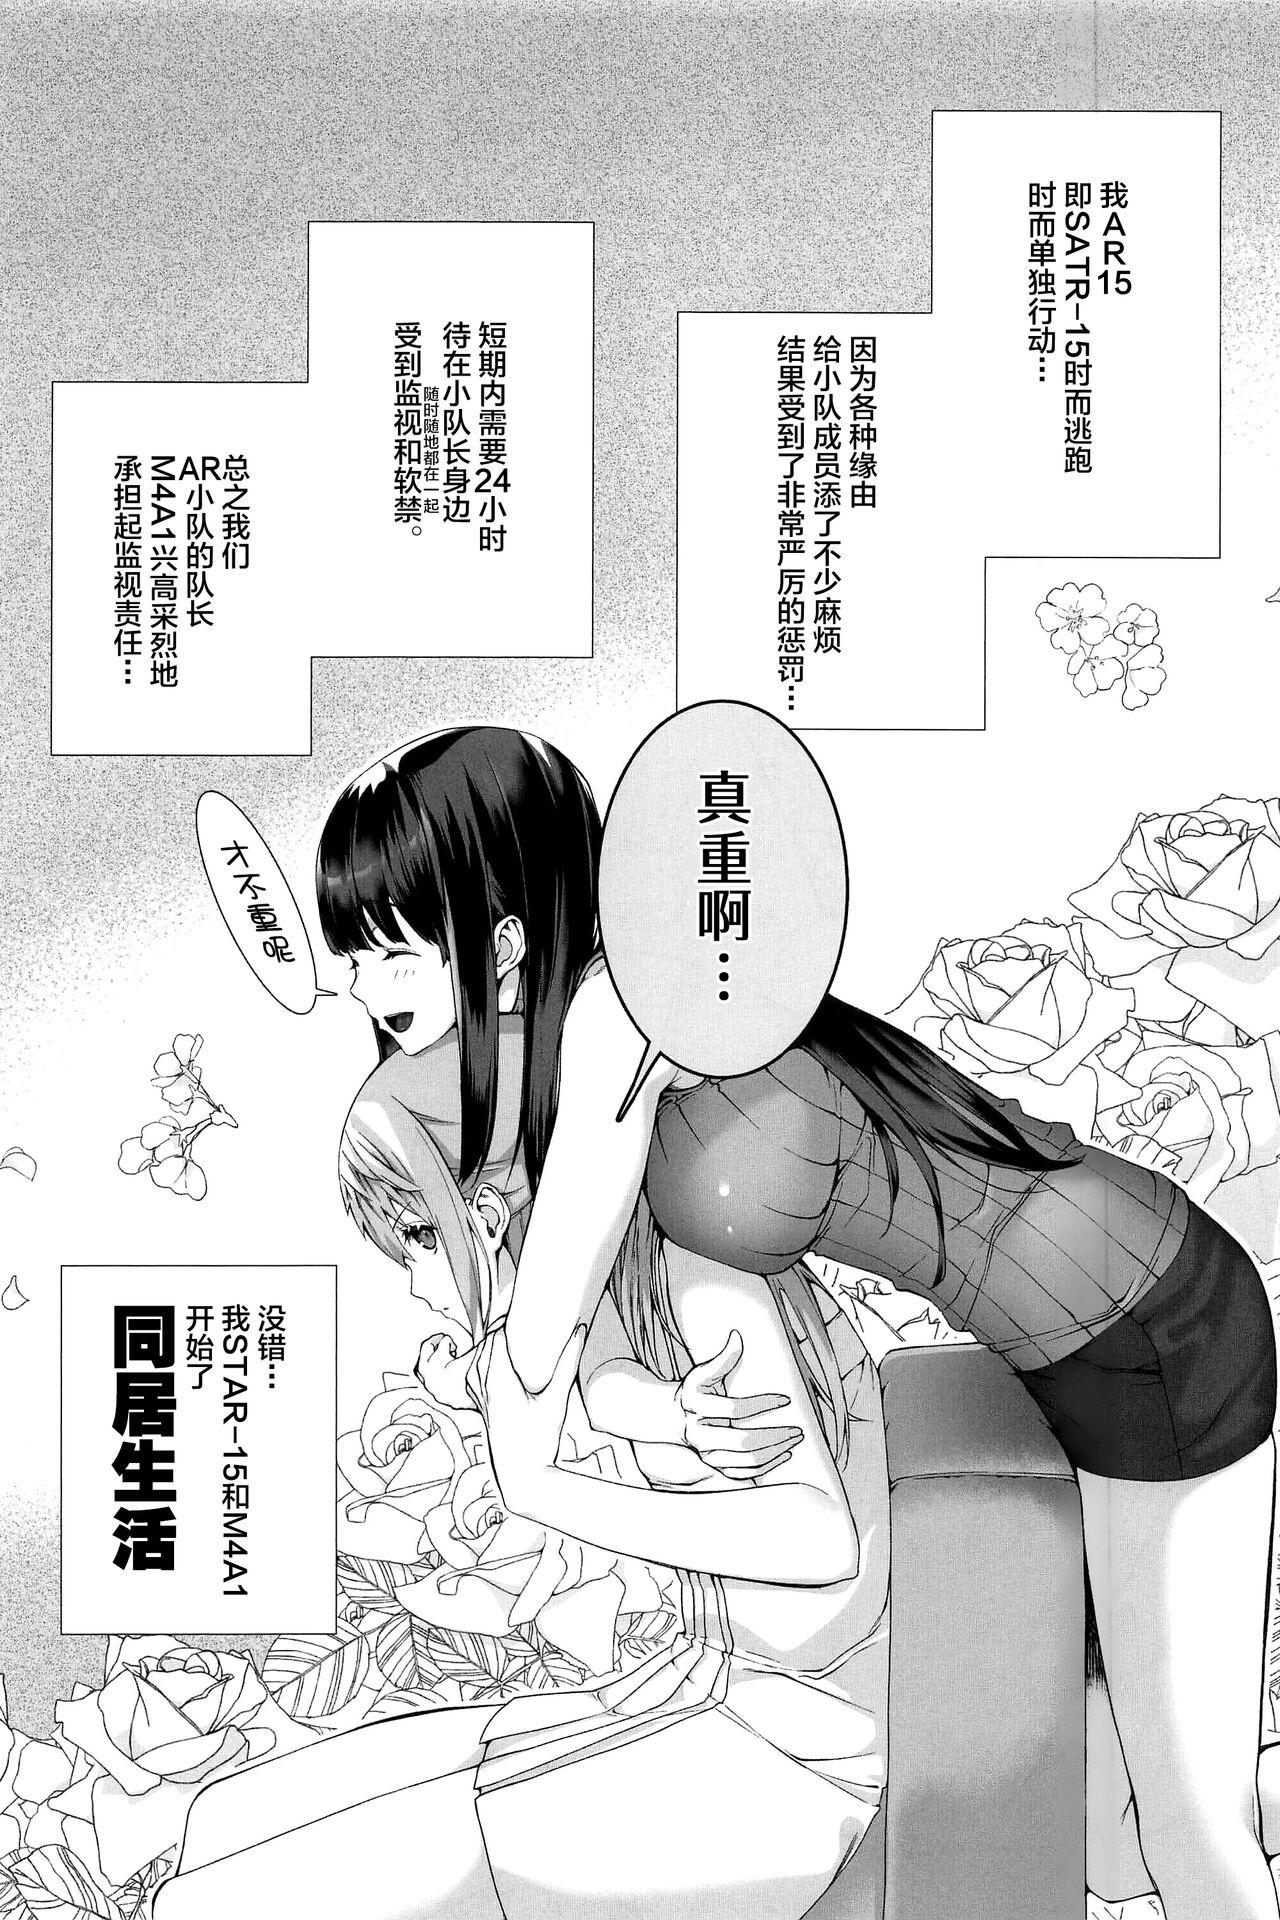 Free Blowjob Porn STAR15&M4A1 - Girls frontline Rabo - Page 3